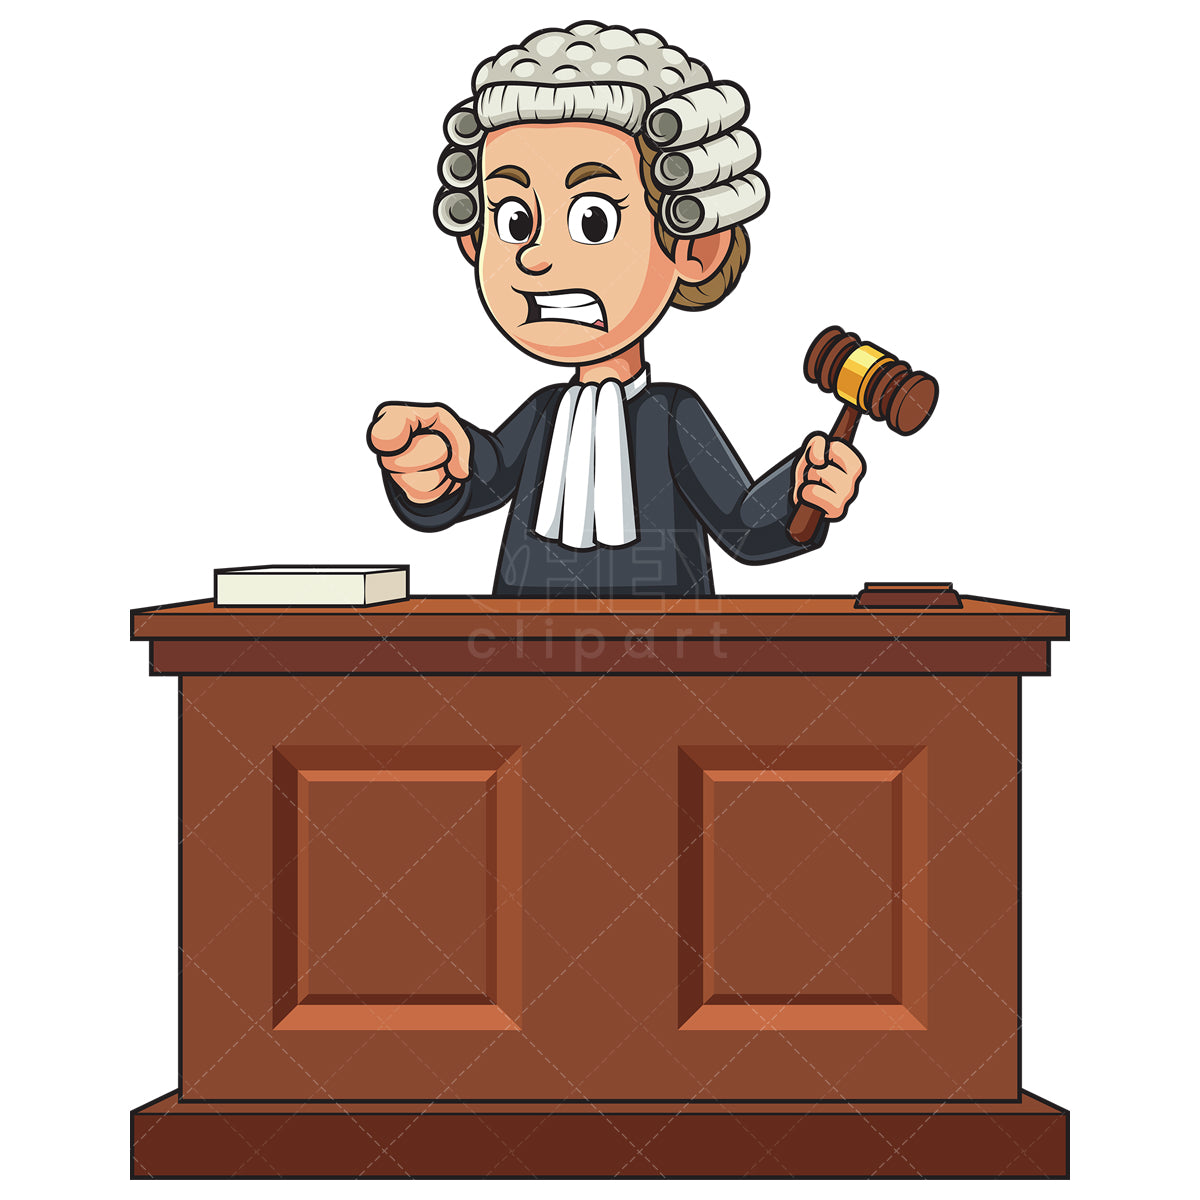 Royalty-free stock vector illustration of a female judge pointing angrily while holding gavel.